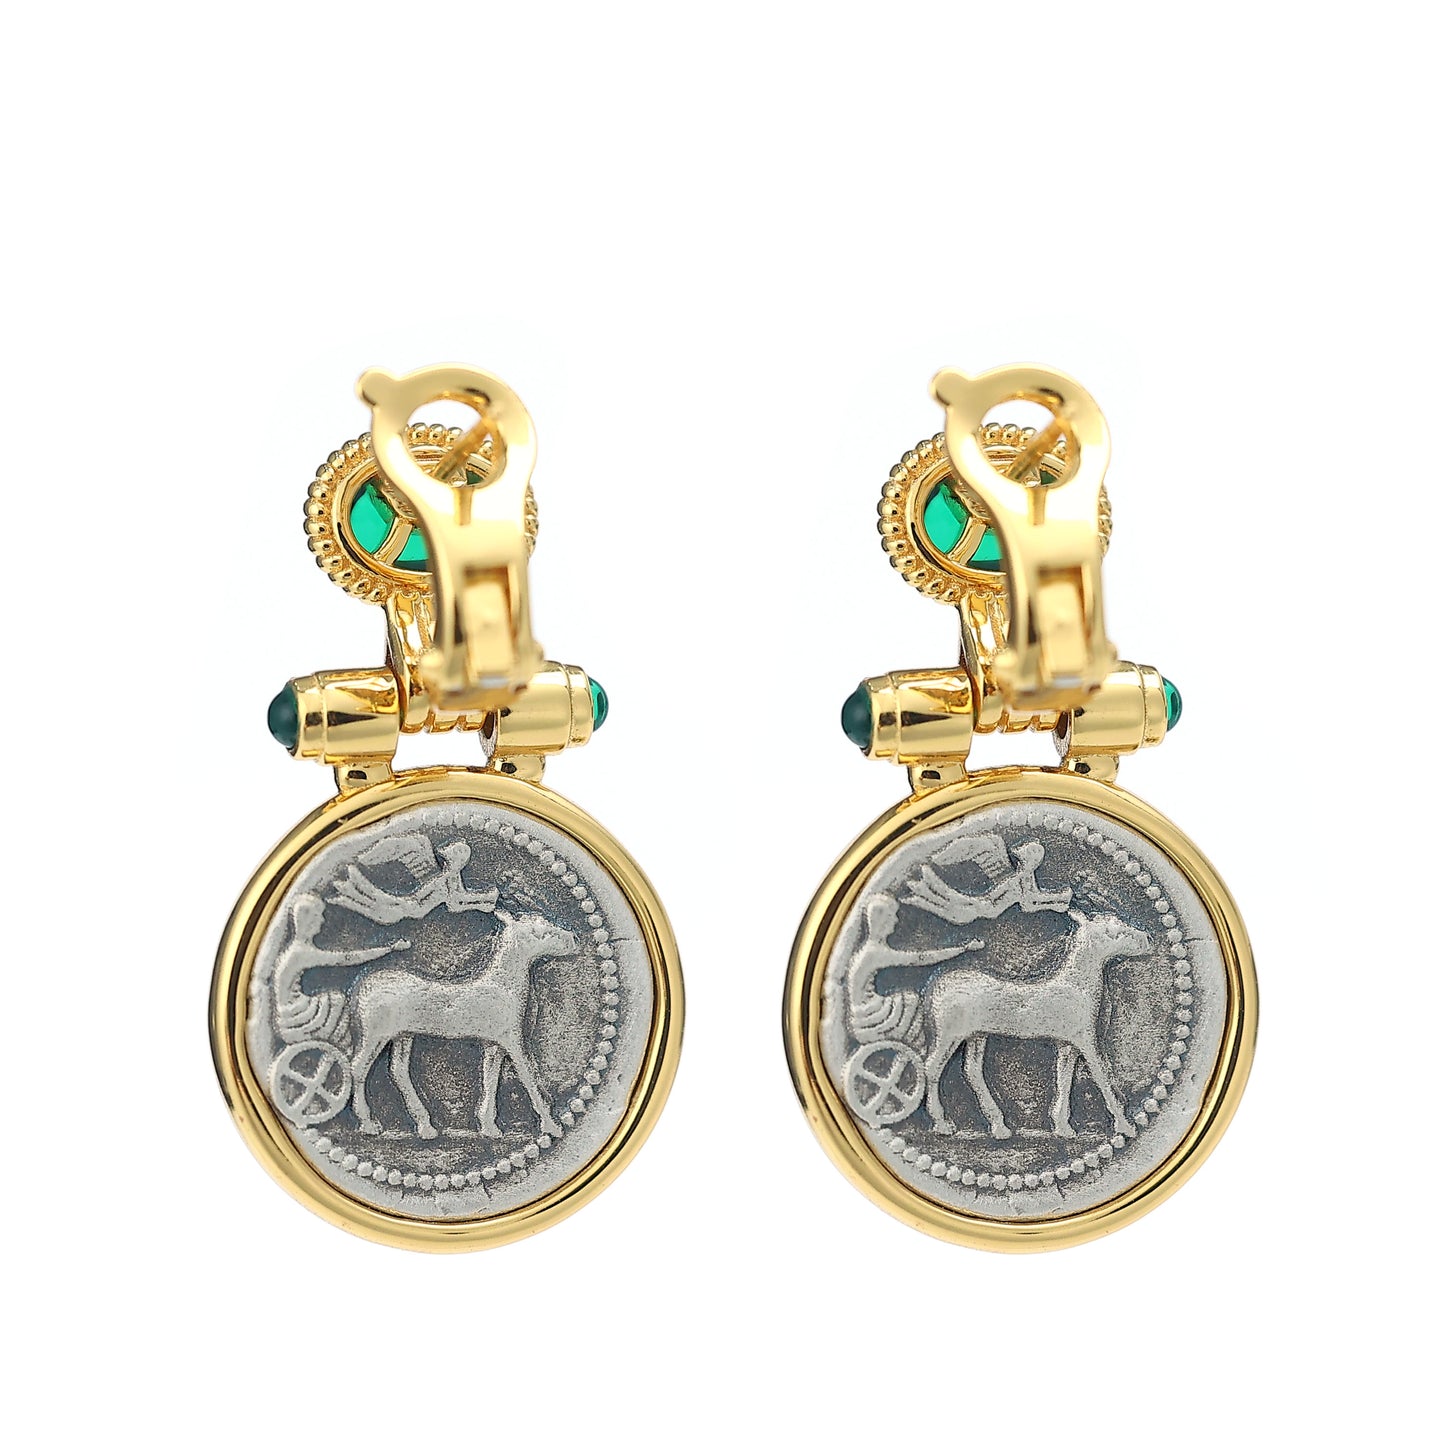 Micro-setting two-sided ancient coin Peter rabbit earrings, sterling silver.